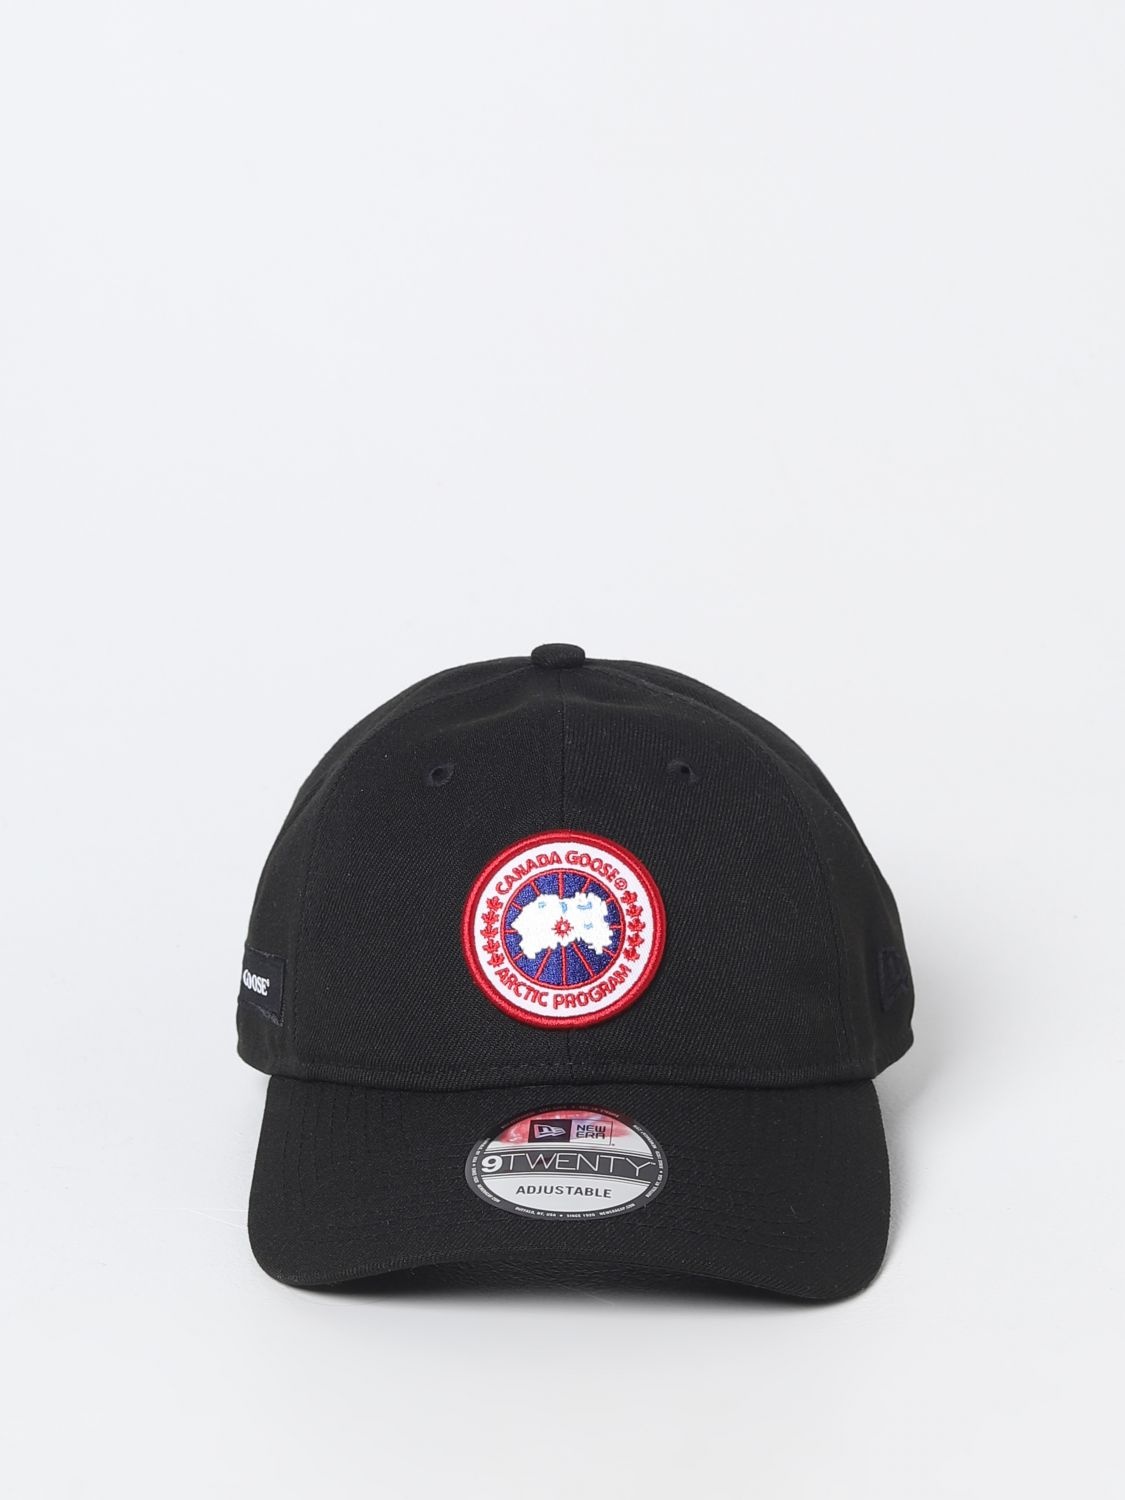 Canada Goose hat for man - 2